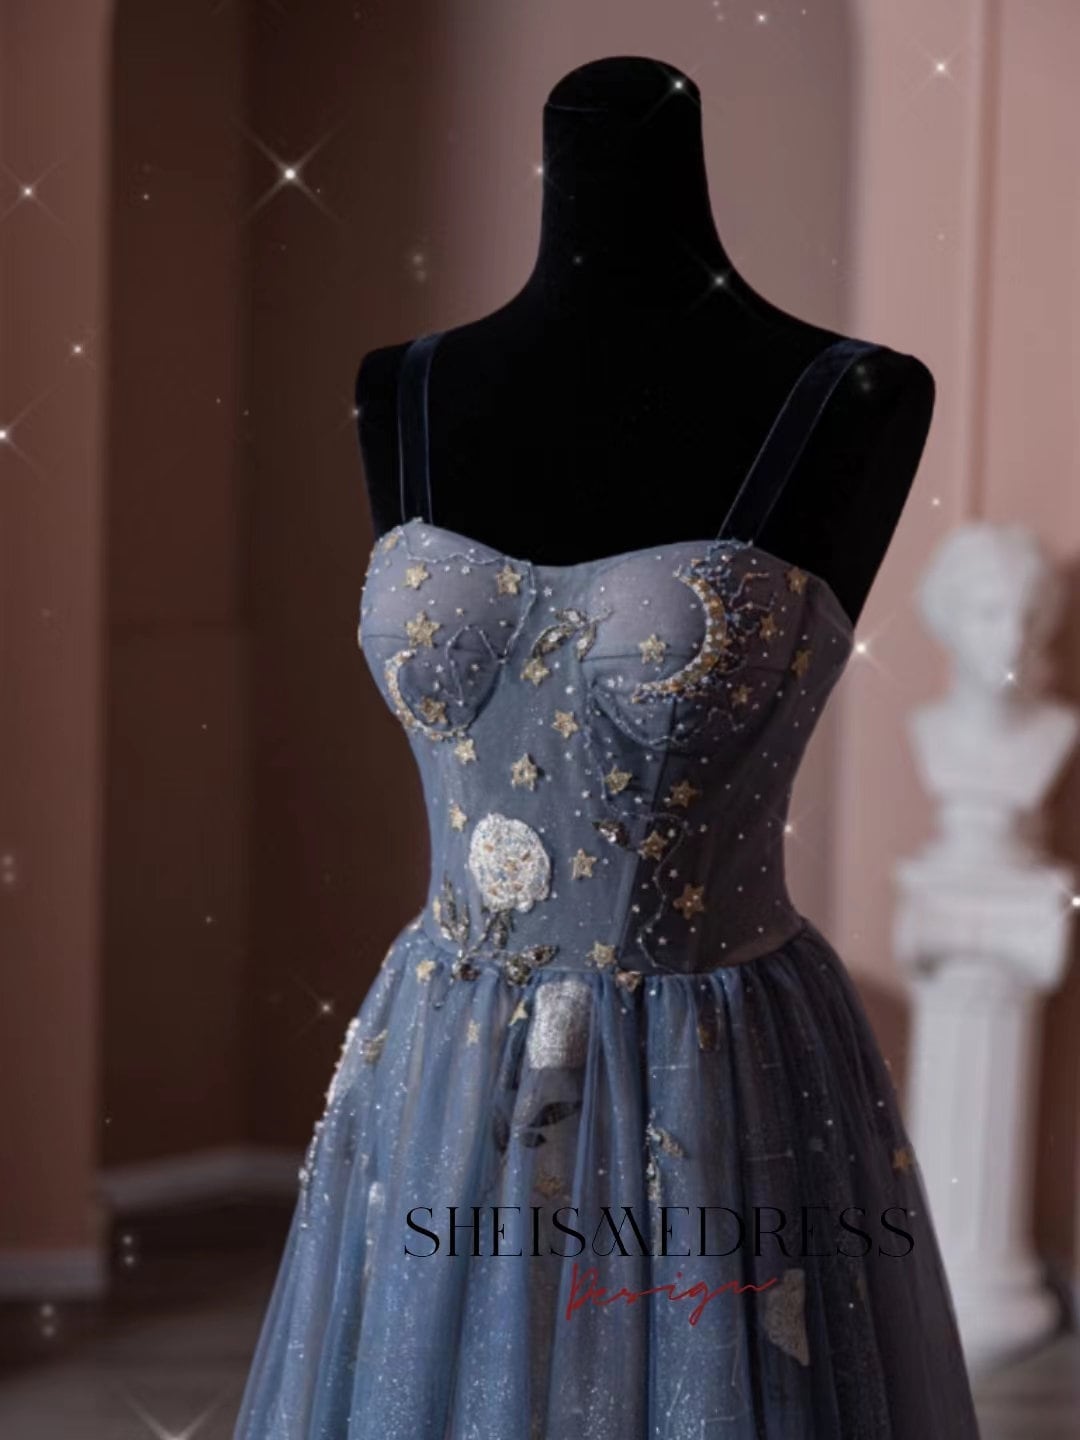 Prom Dress You Could Wear with Bra, formal Dresses with Can to